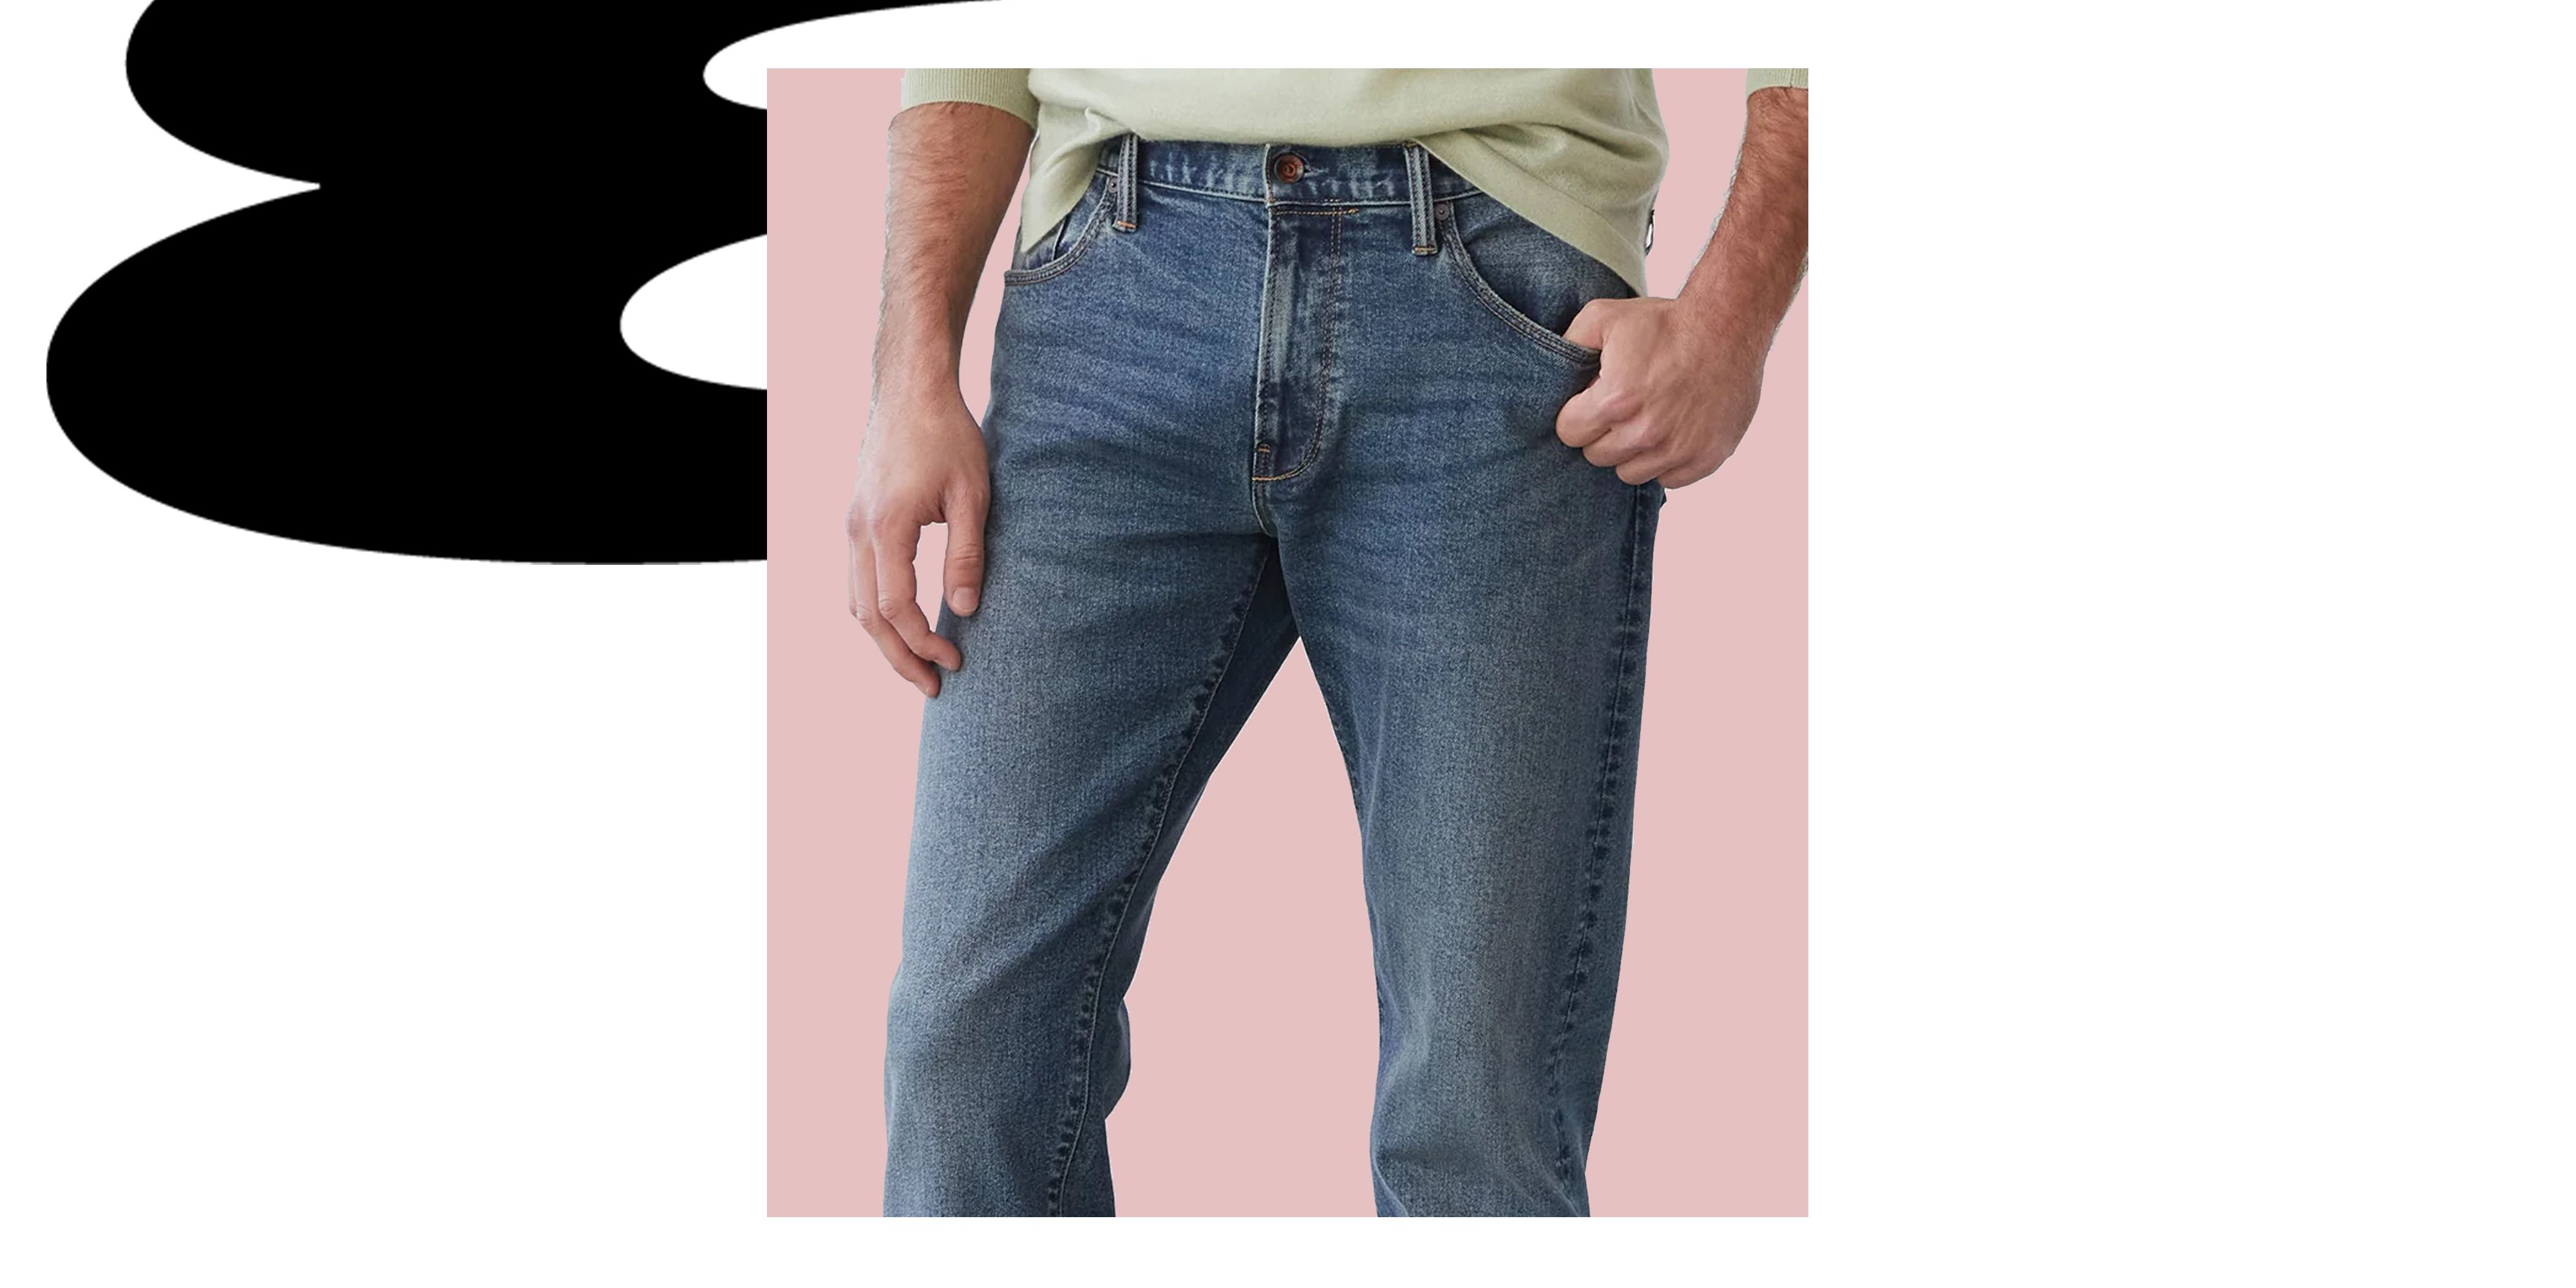 Fashion puts men in a tight spot with pants that keep shrinking